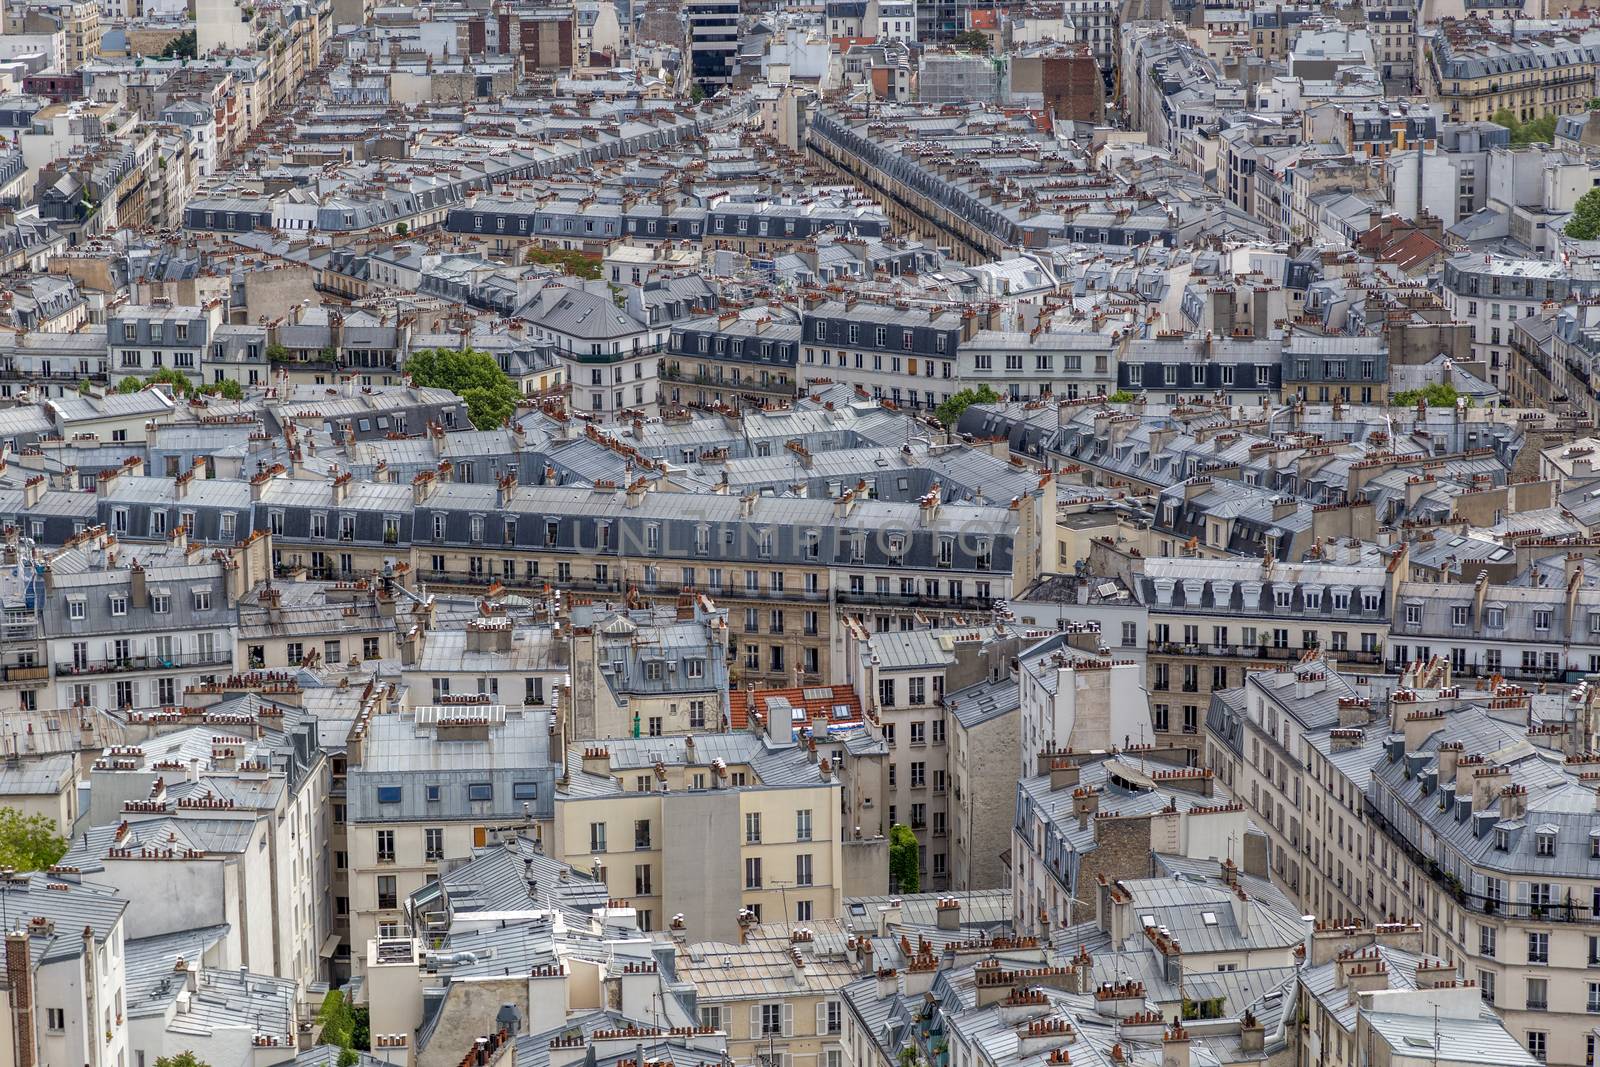 Paris, France - May 12, 2017: Rooftop view of Montmartre district from top of Sacre Coeur Basilica